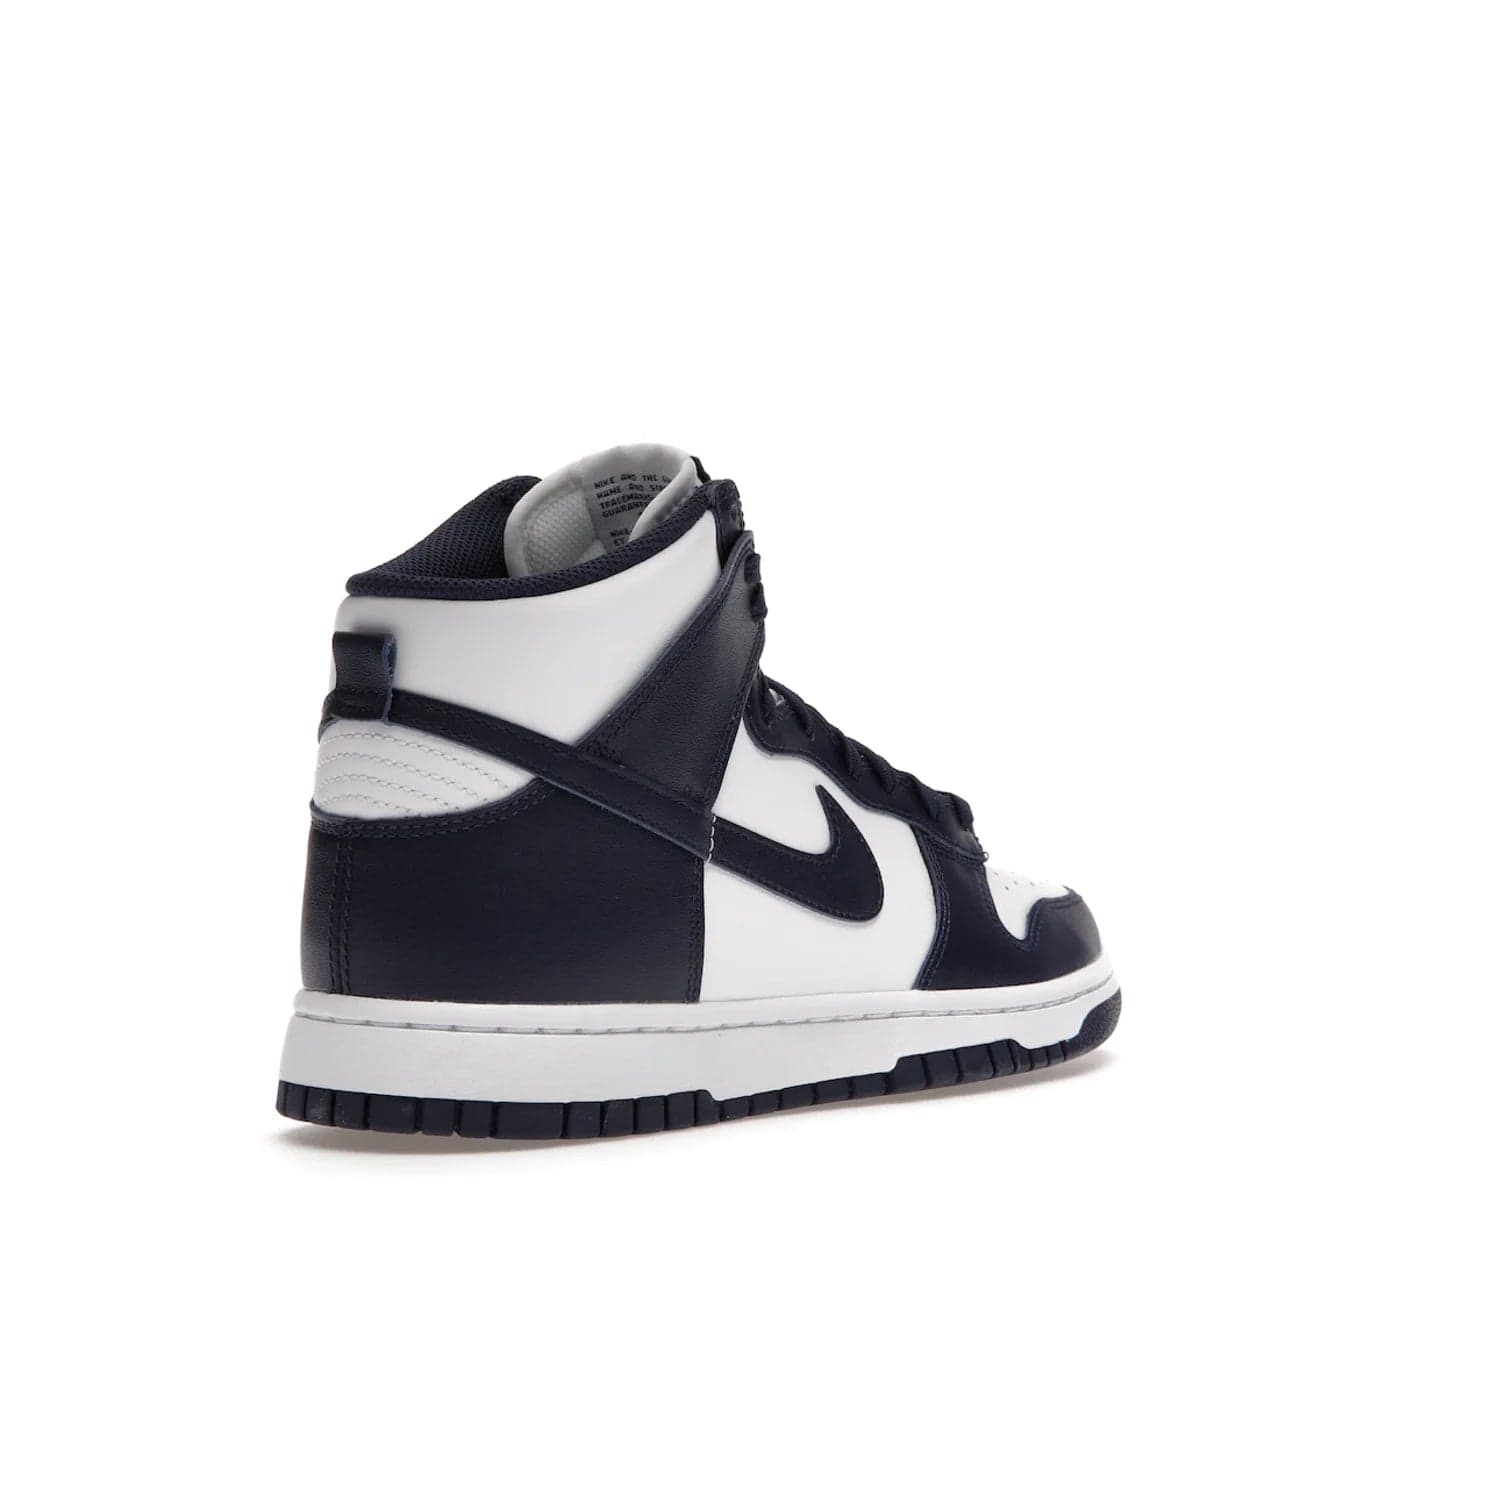 Nike Dunk High Championship Navy - Image 32 - Only at www.BallersClubKickz.com - Classic Nike Dunk High sneaker delivers an unforgettable style with white leather upper, Championship Navy overlays, and matching woven tongue label and sole. Make a statement with the Championship Navy today.